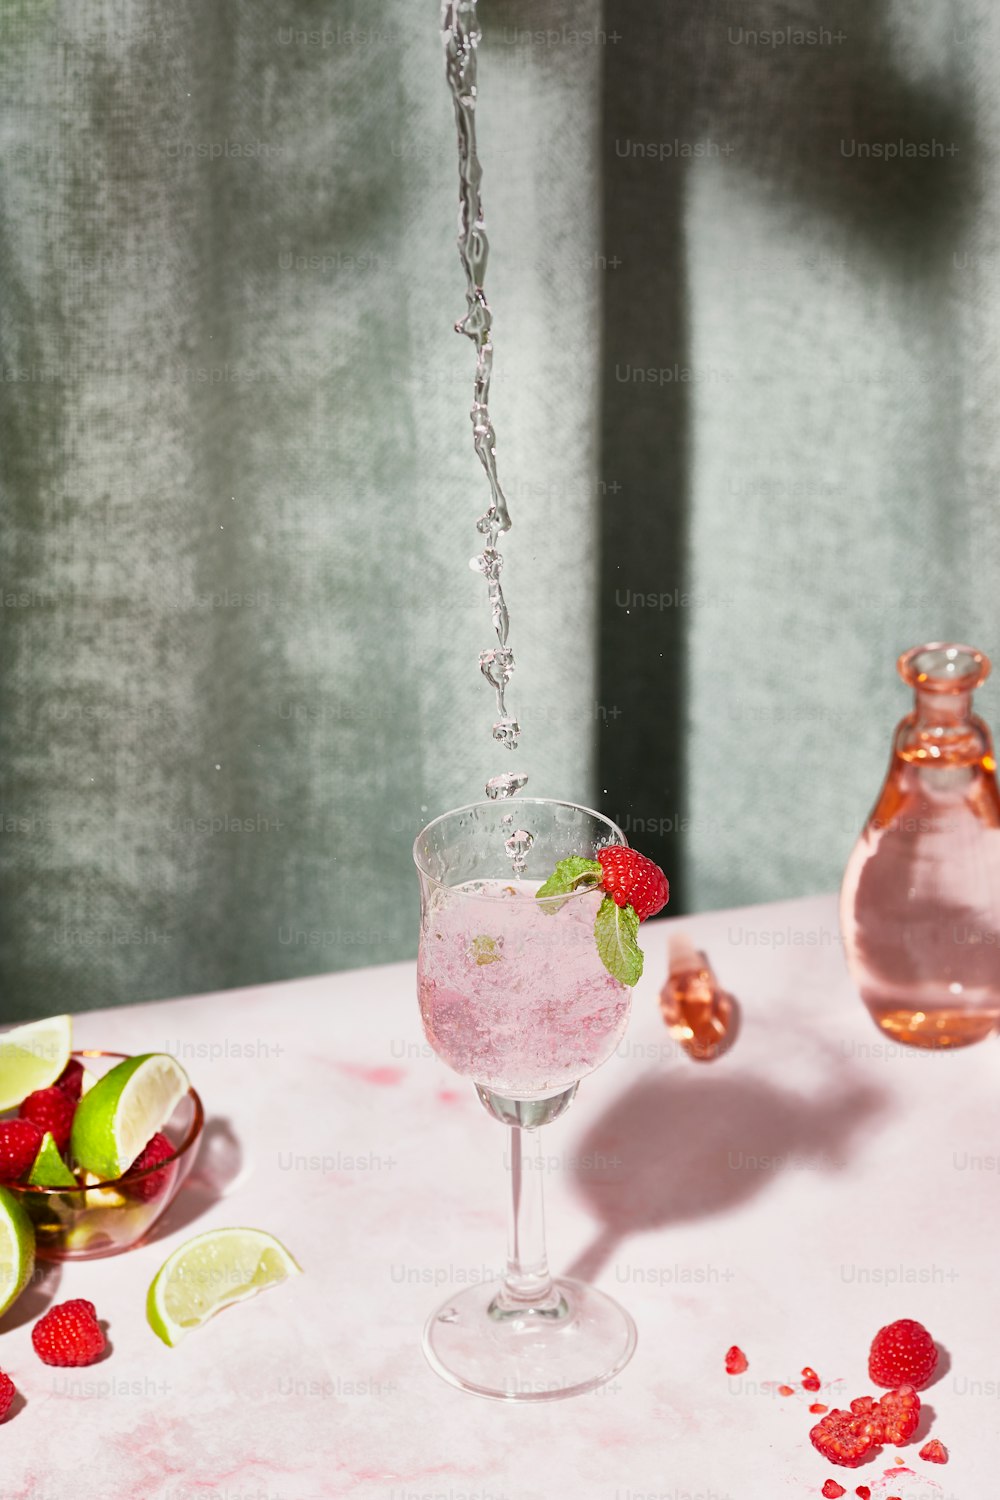 a glass of water with strawberries and limes on a table